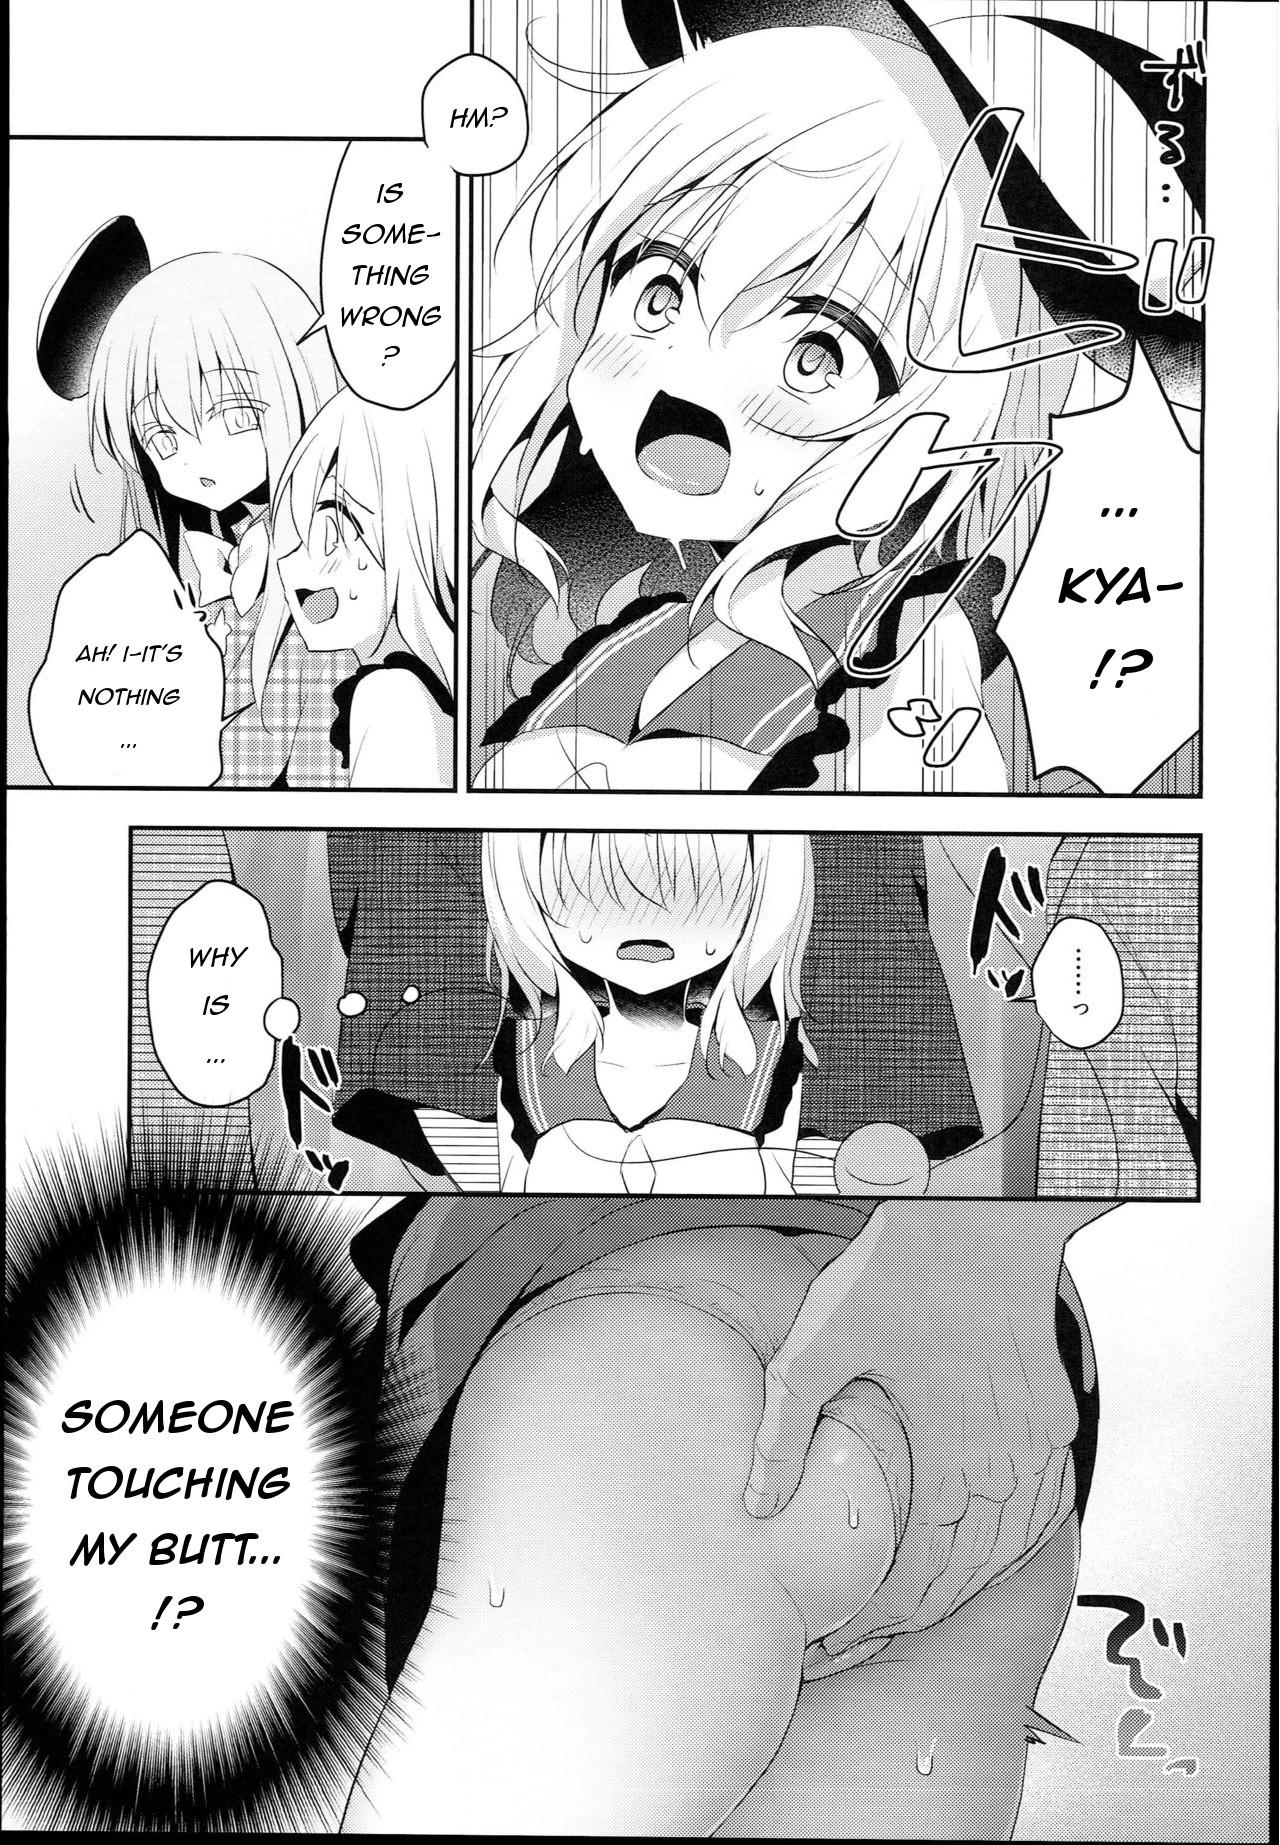 For Chikan Addiction - Touhou project Free Blowjobs - Page 5